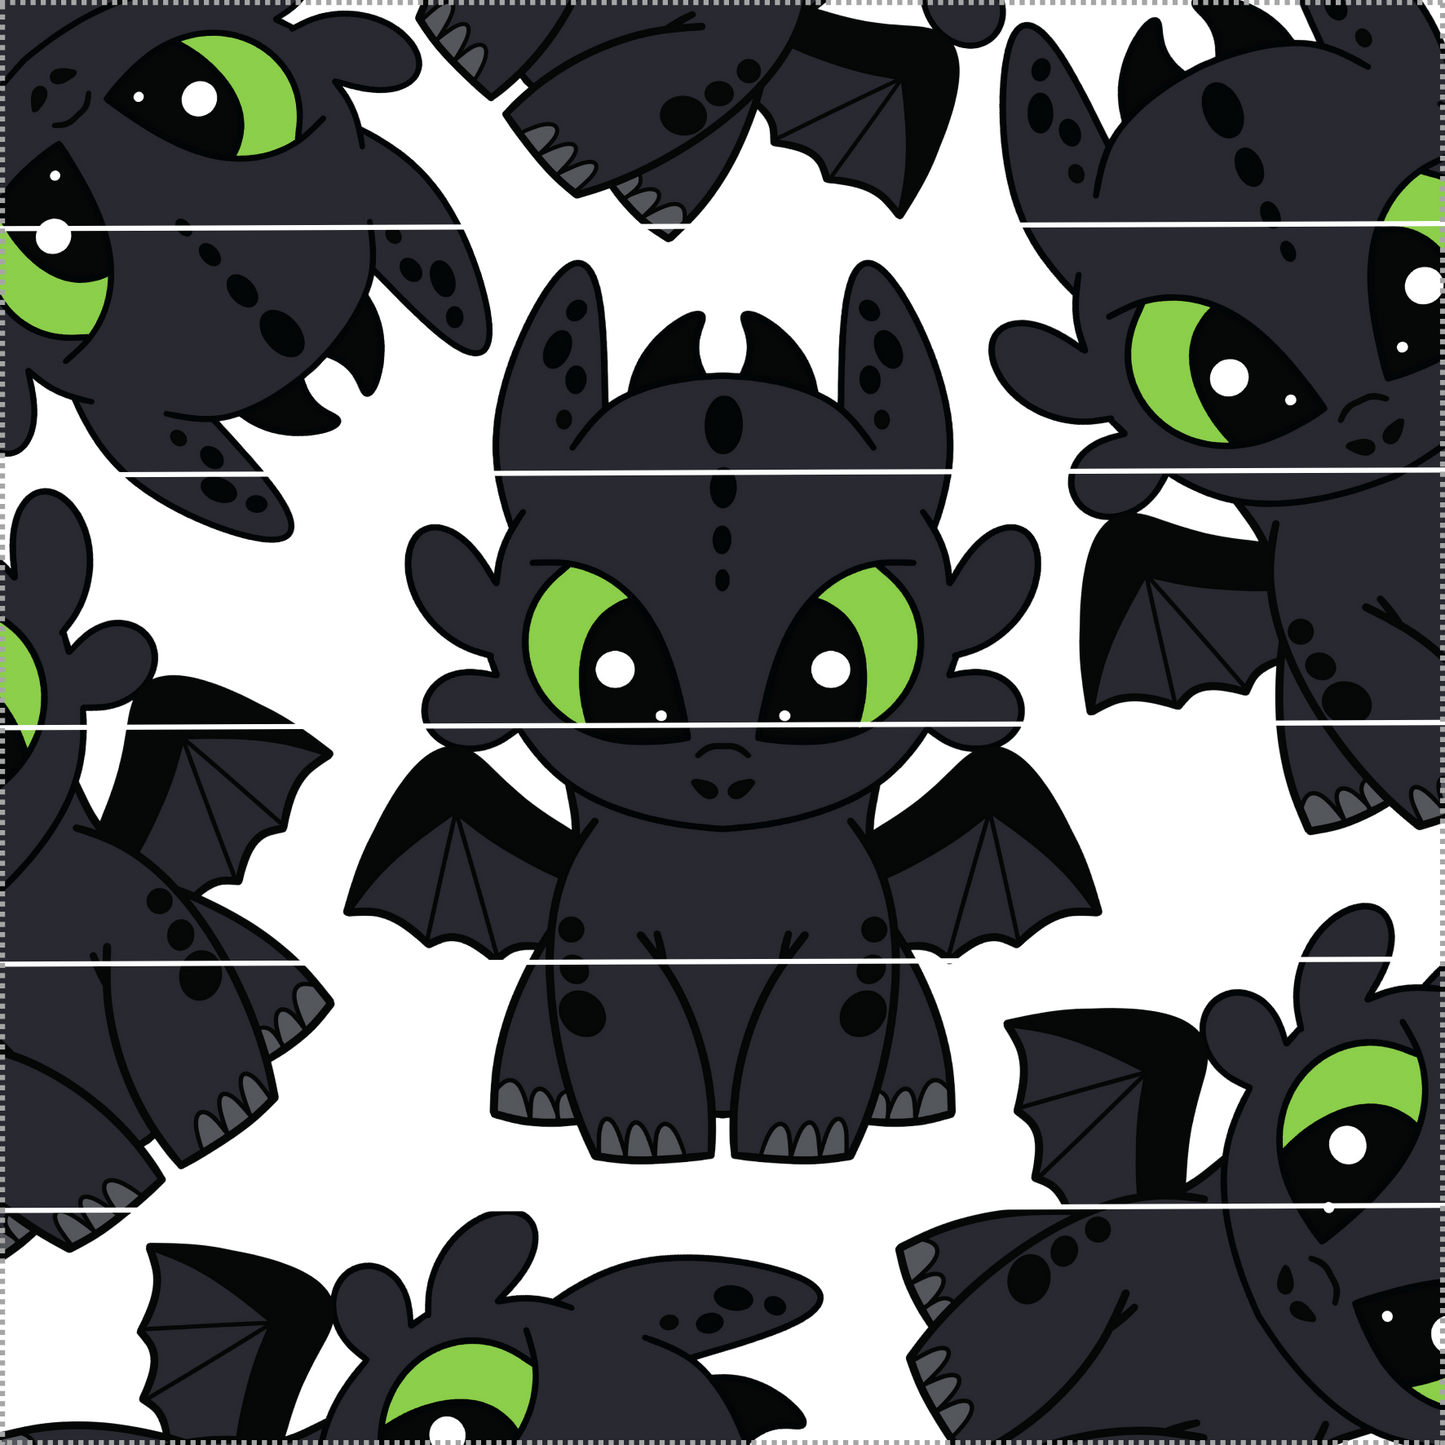 111 - HOW TO TRAIN YOUR DRAGON - TOOTHLESS COOKIE CUTTER